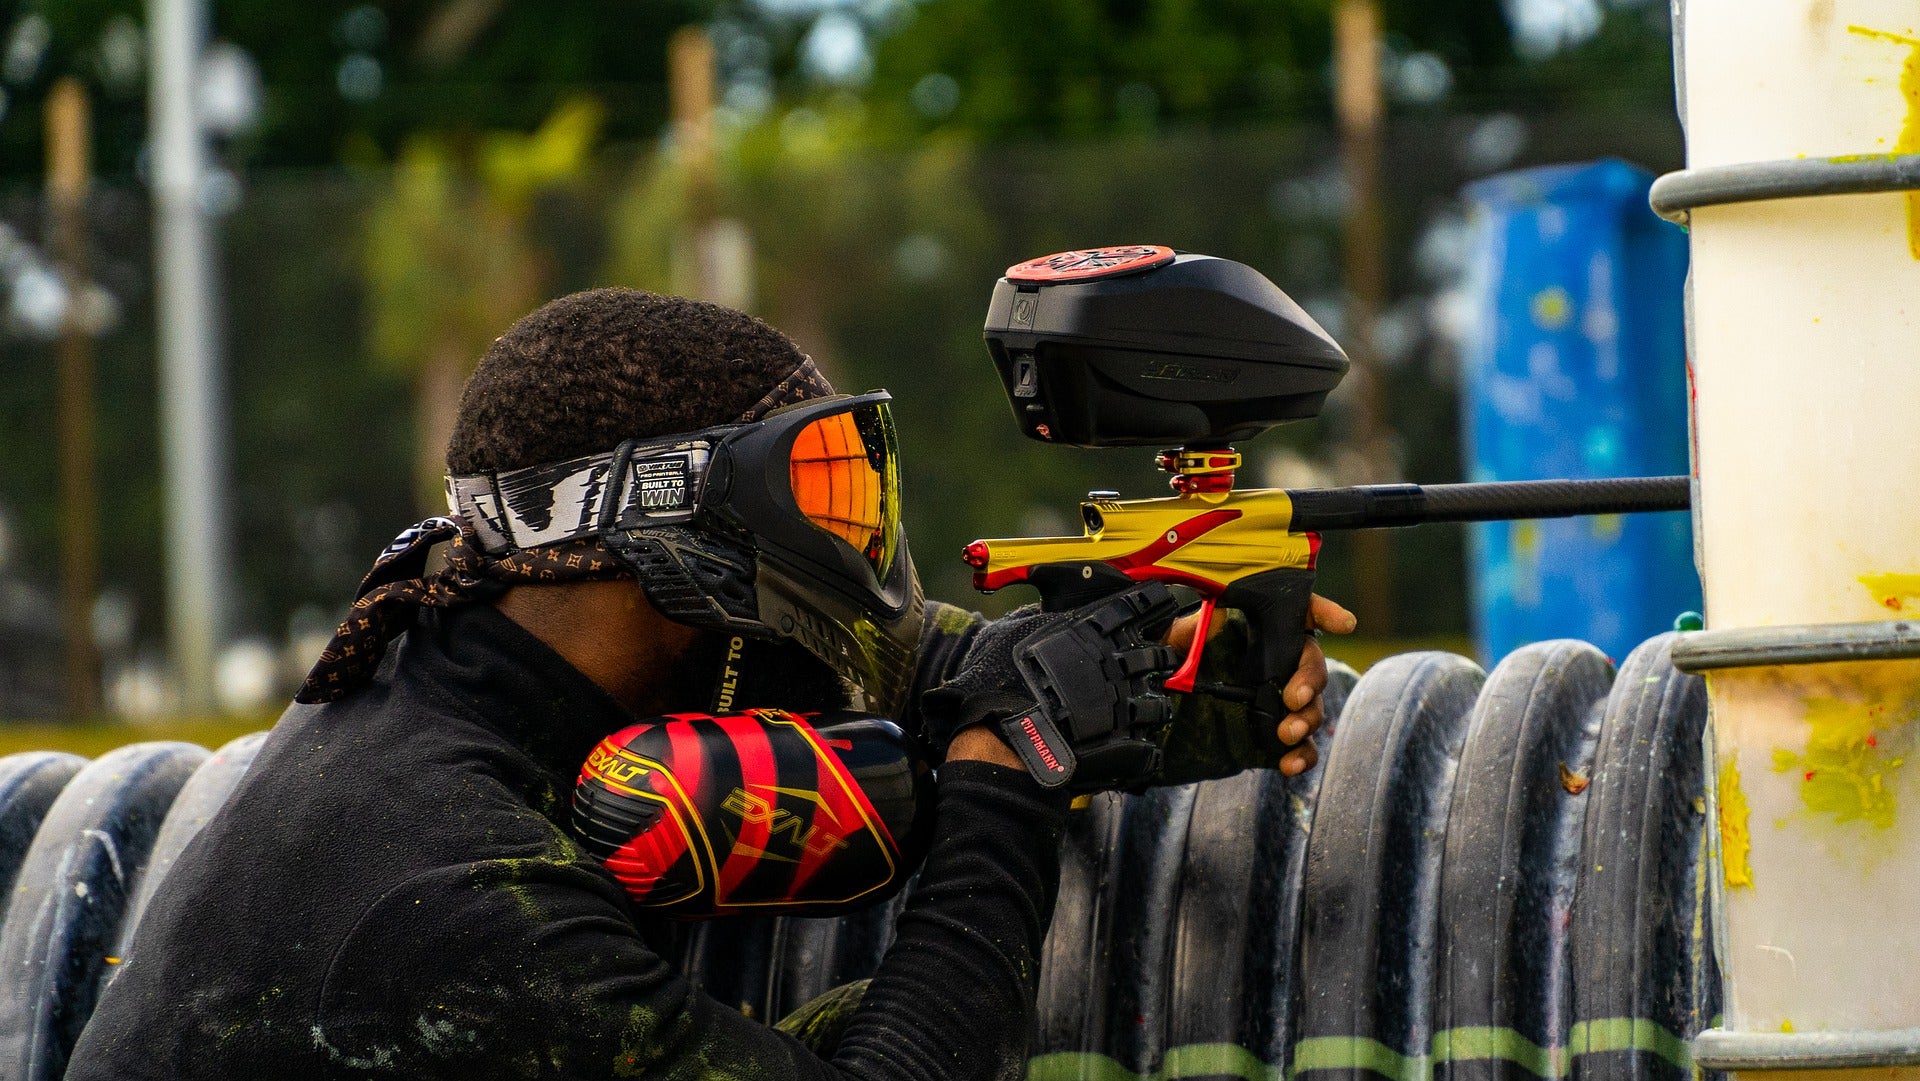 Sniper Assassin at Paintball Scenario, None other than Gom…